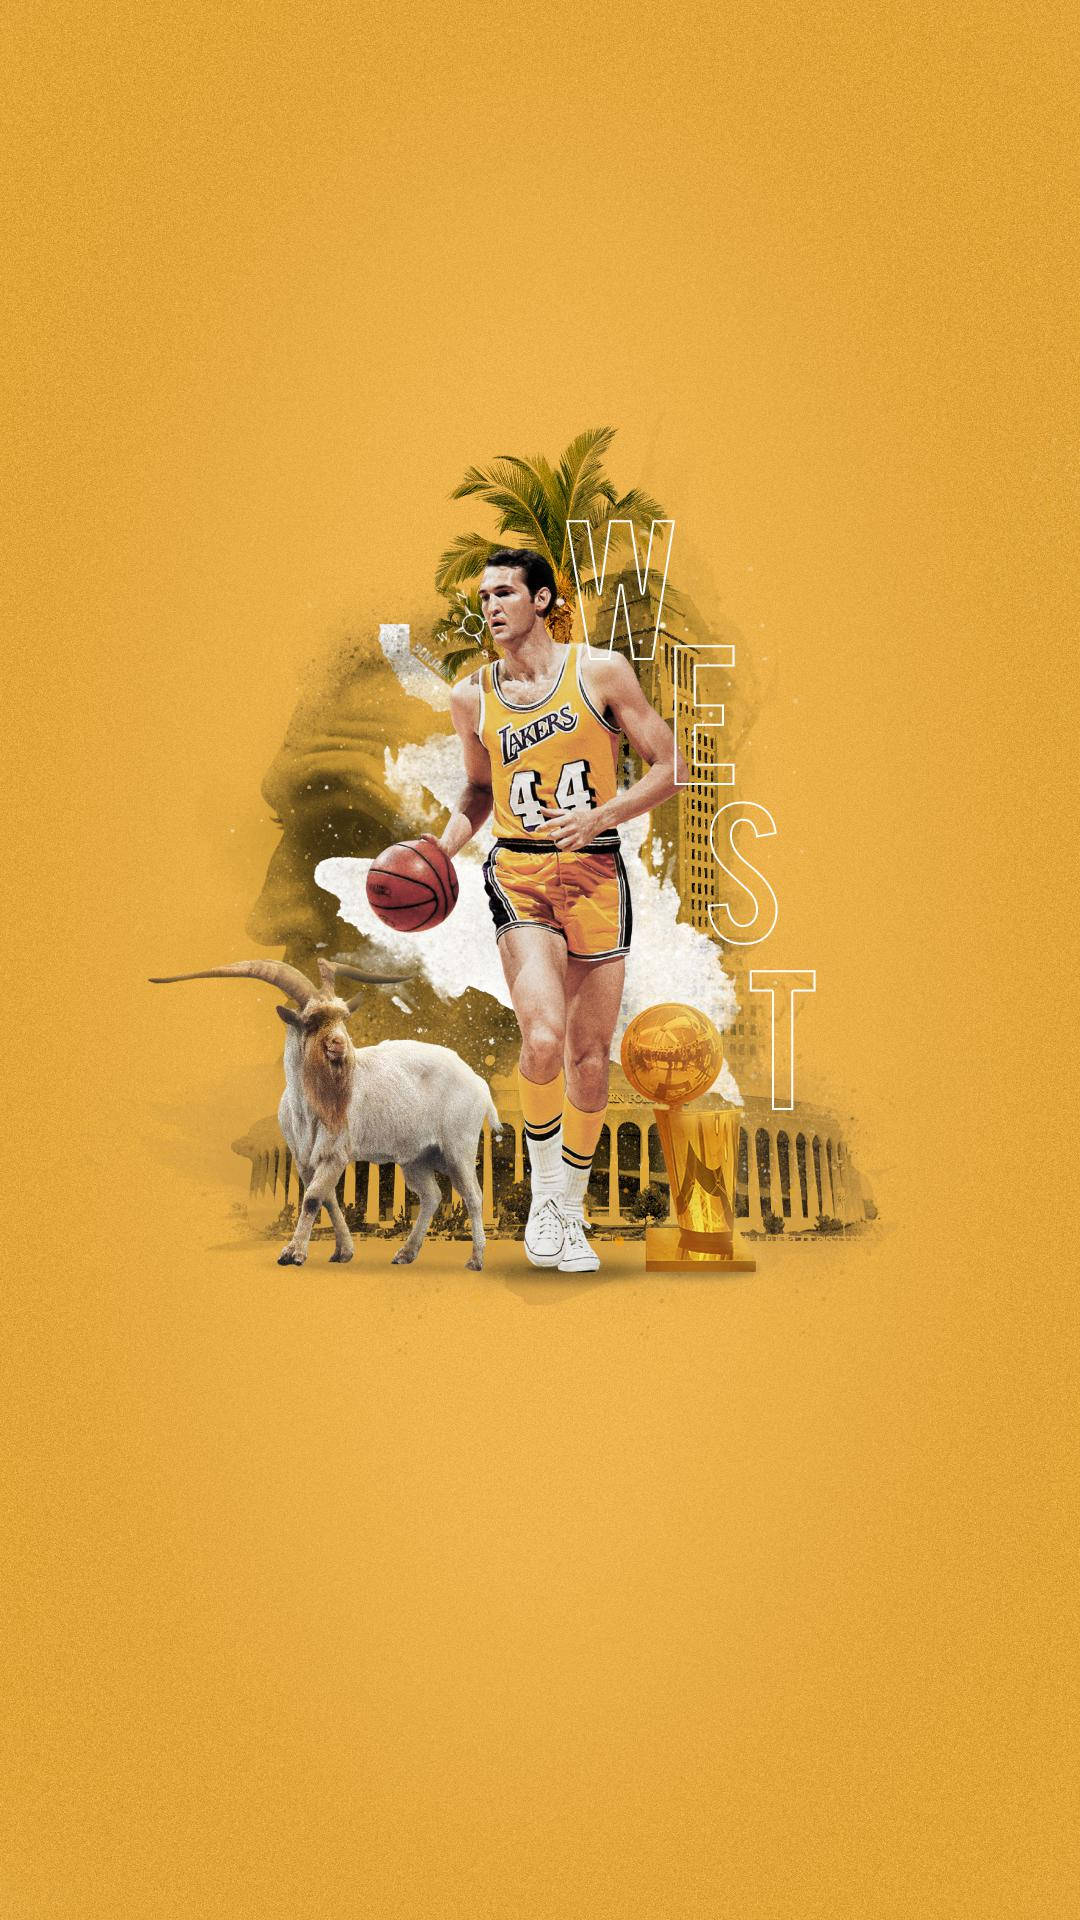 The NBA Legend - Jerry West in his prime Wallpaper